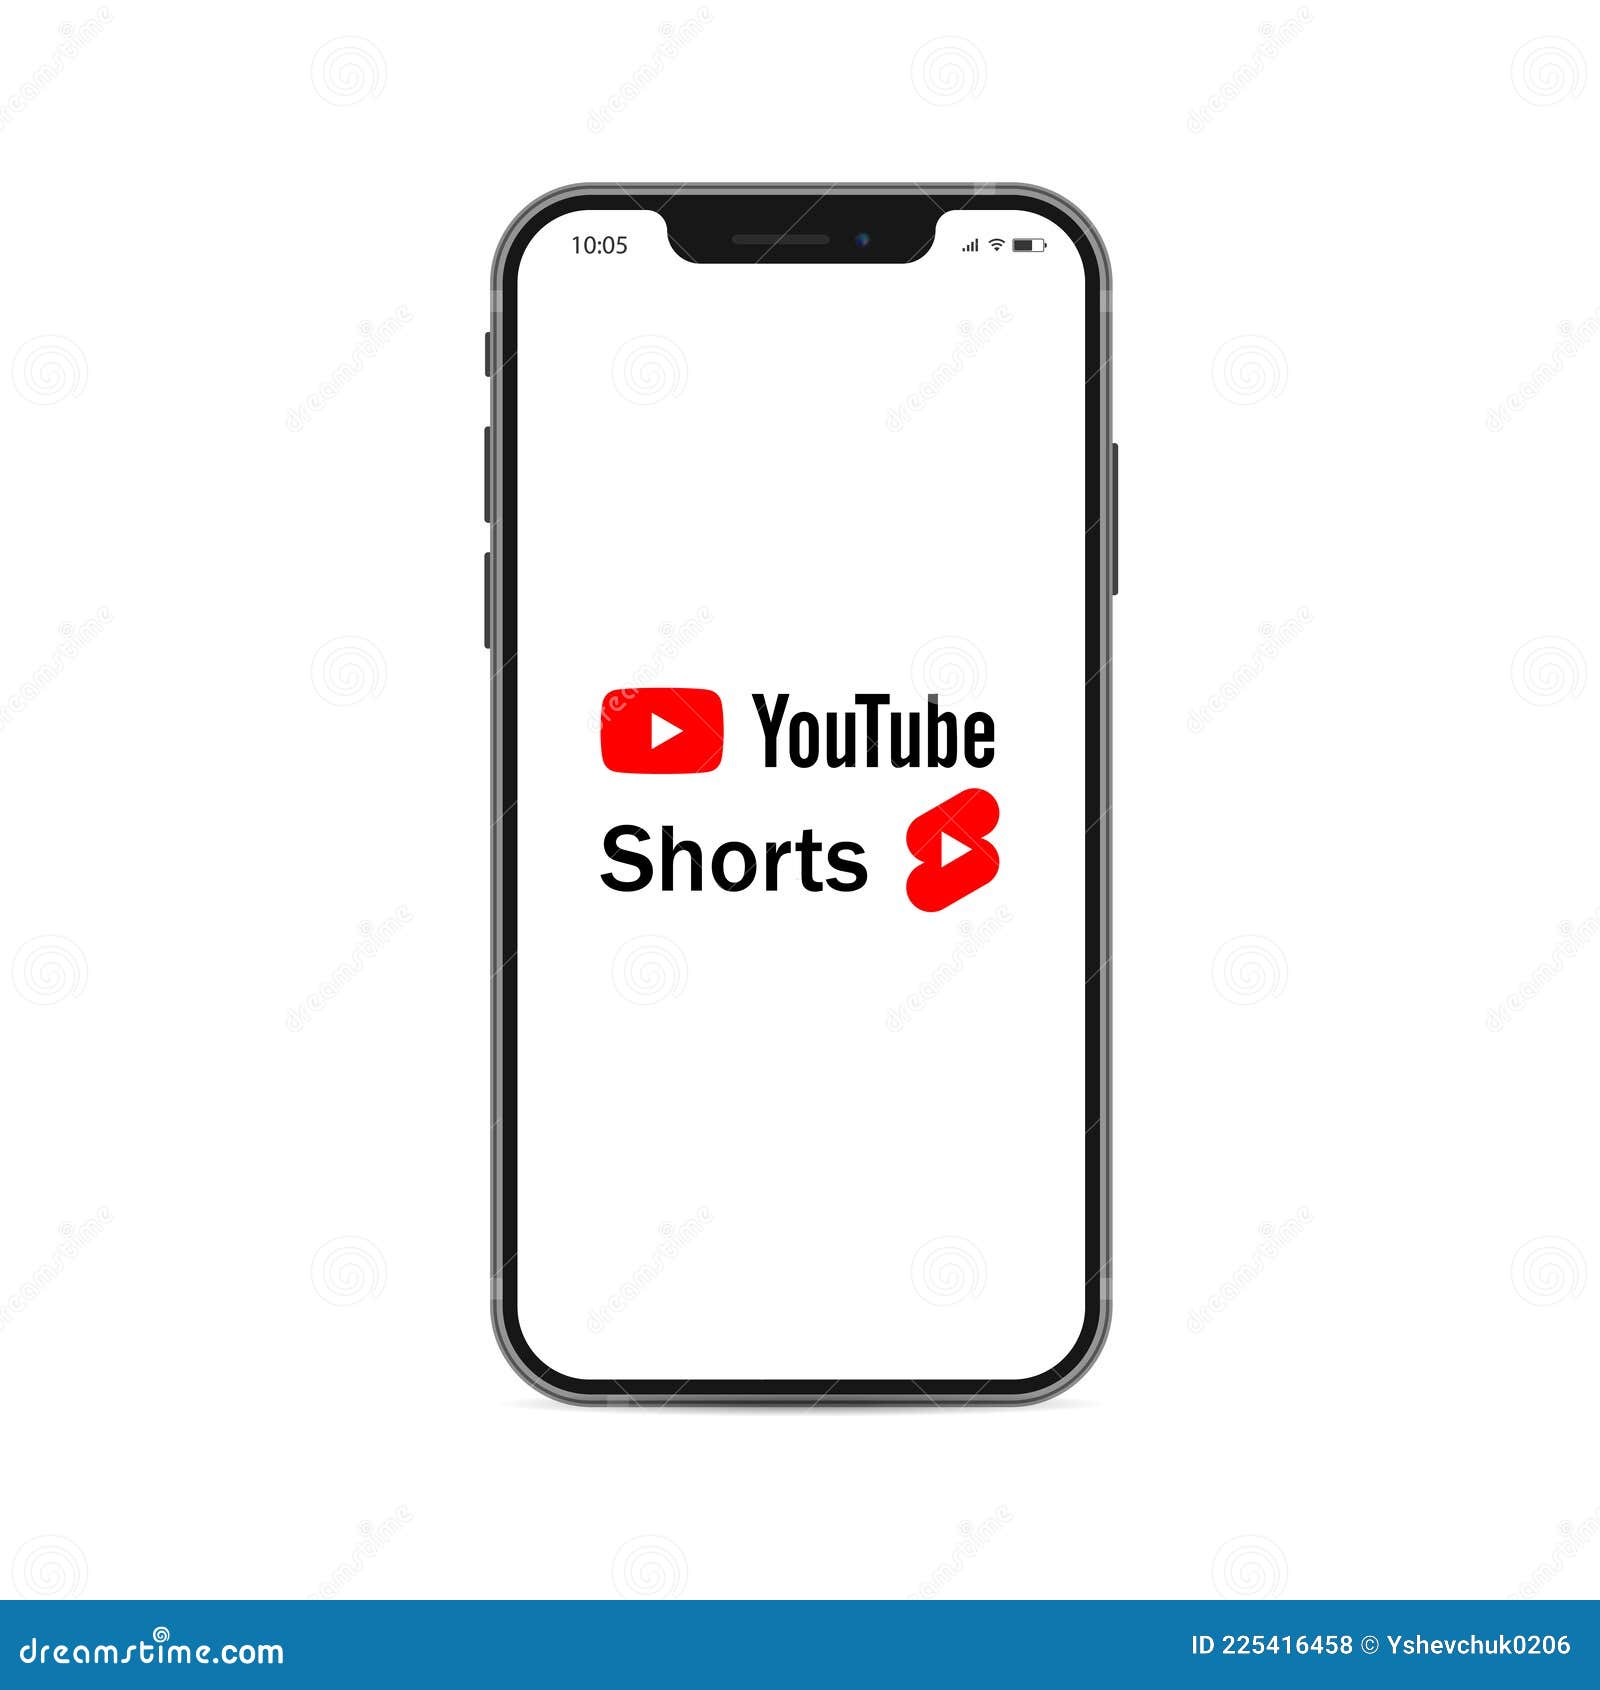 Youtube Youtube Shorts Logo On Apple Iphone Subscribe Button Icon With Arrow Cursor Official Logotypes Of Youtube Apps Kyiv Editorial Stock Photo Illustration Of Media Button